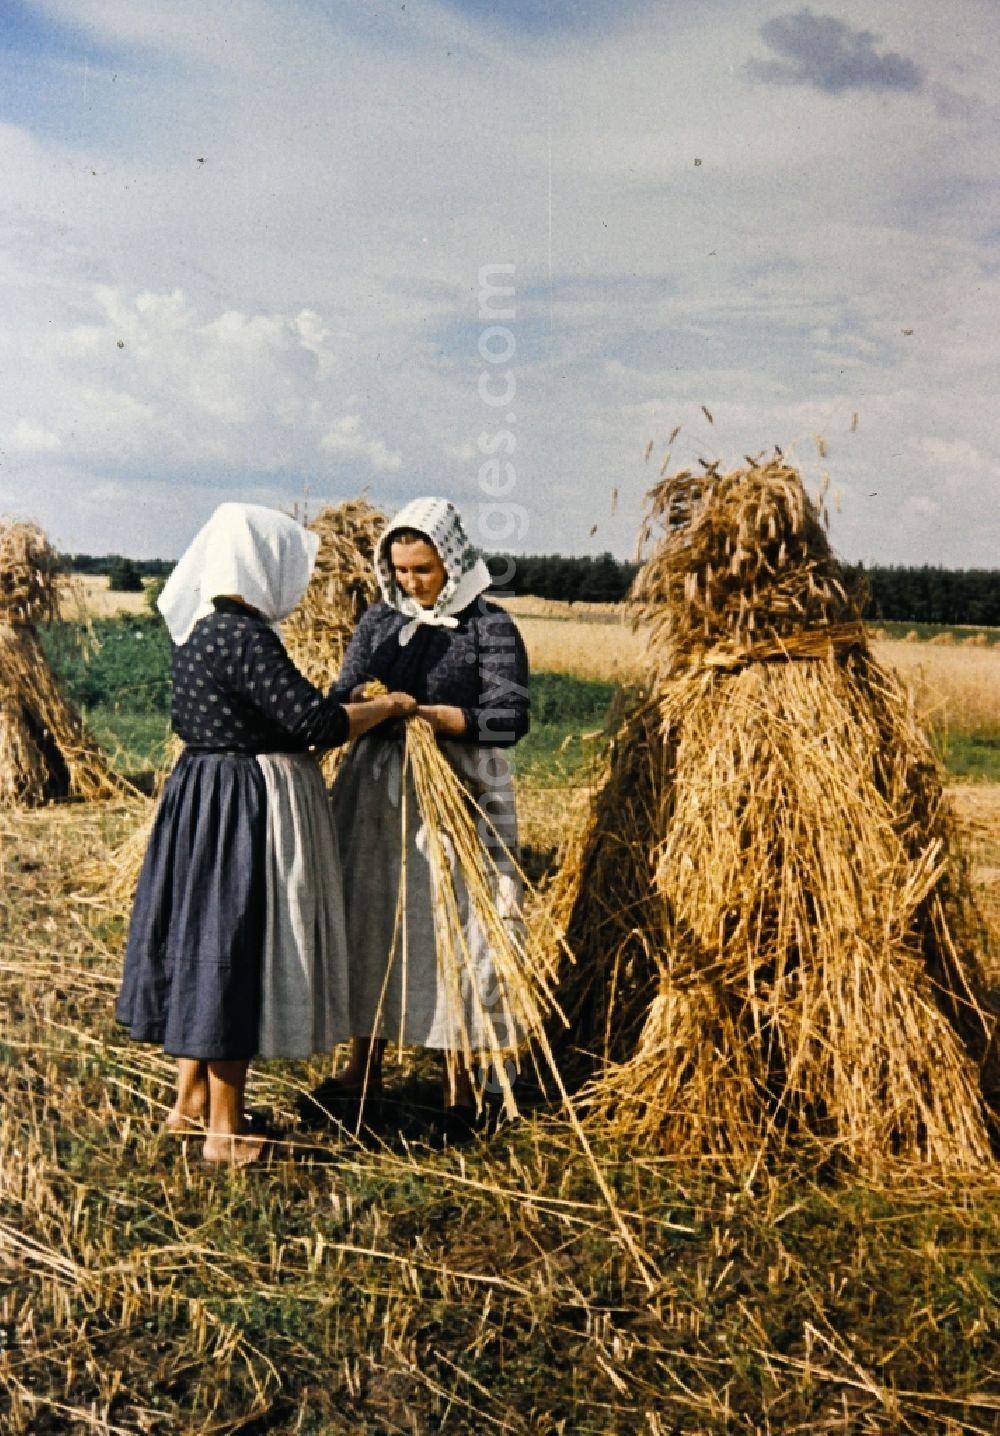 GDR photo archive: Teicha - Farmers harvesting grain and sheaf laying on a harvested field in Teicha in the state Saxony on the territory of the former GDR, German Democratic Republic